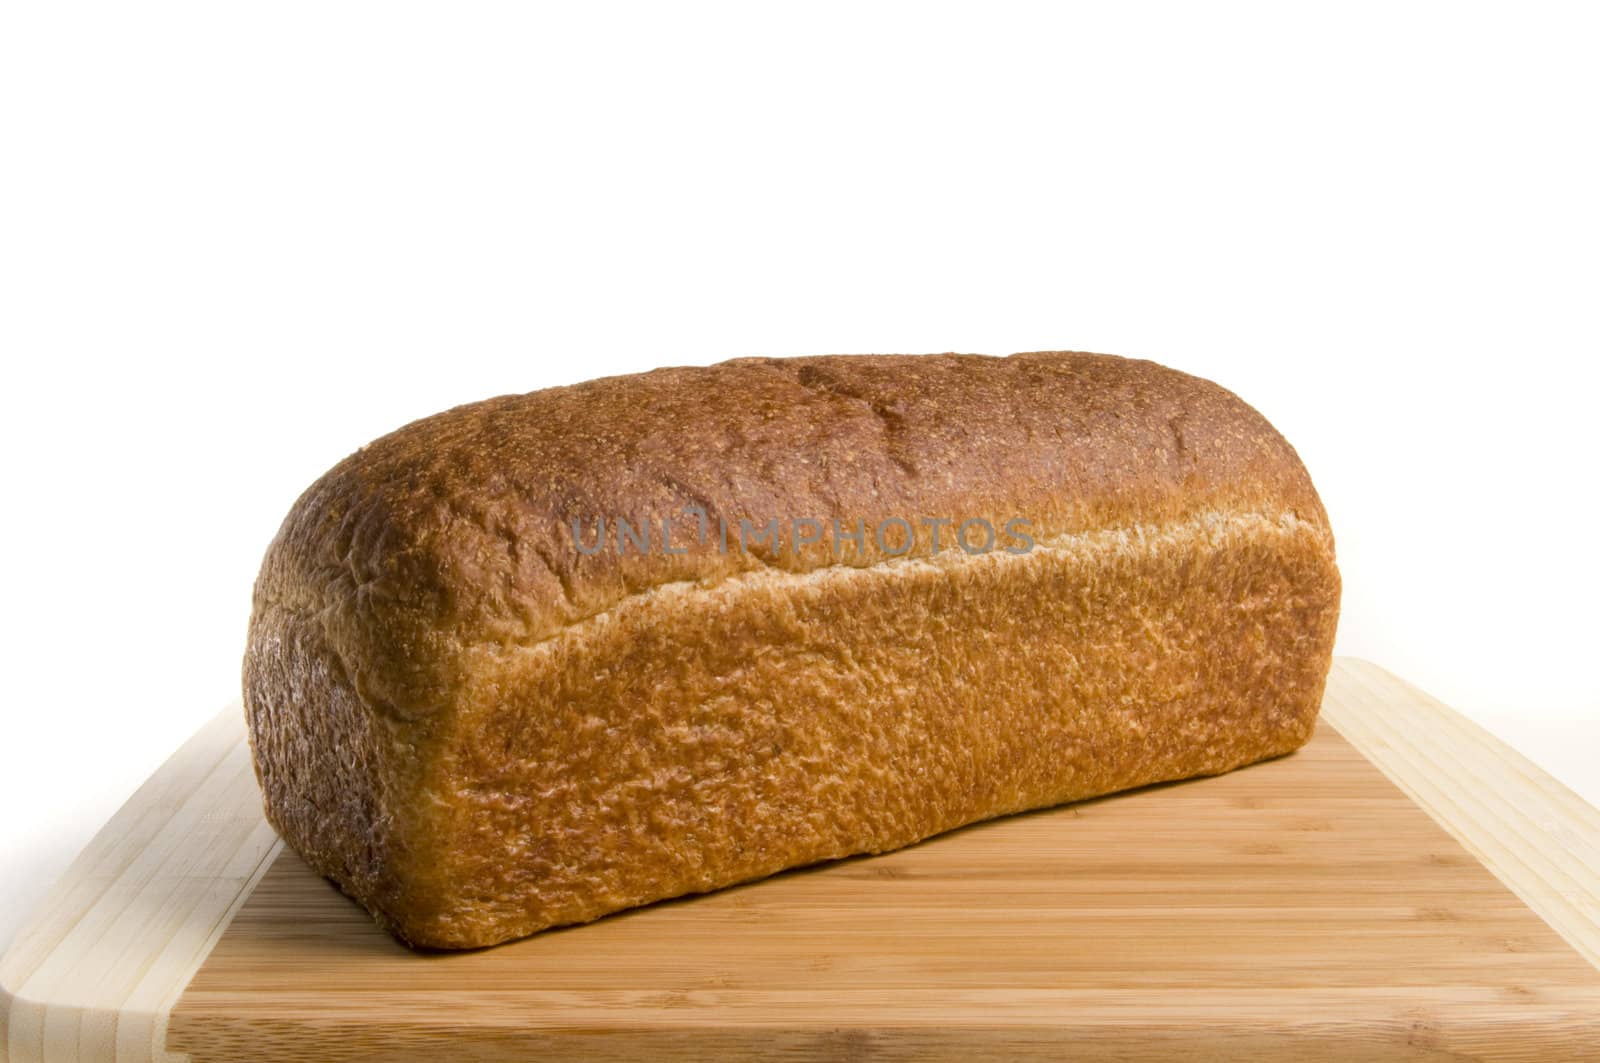 Freshly baked whole wheat bread on a cutting board